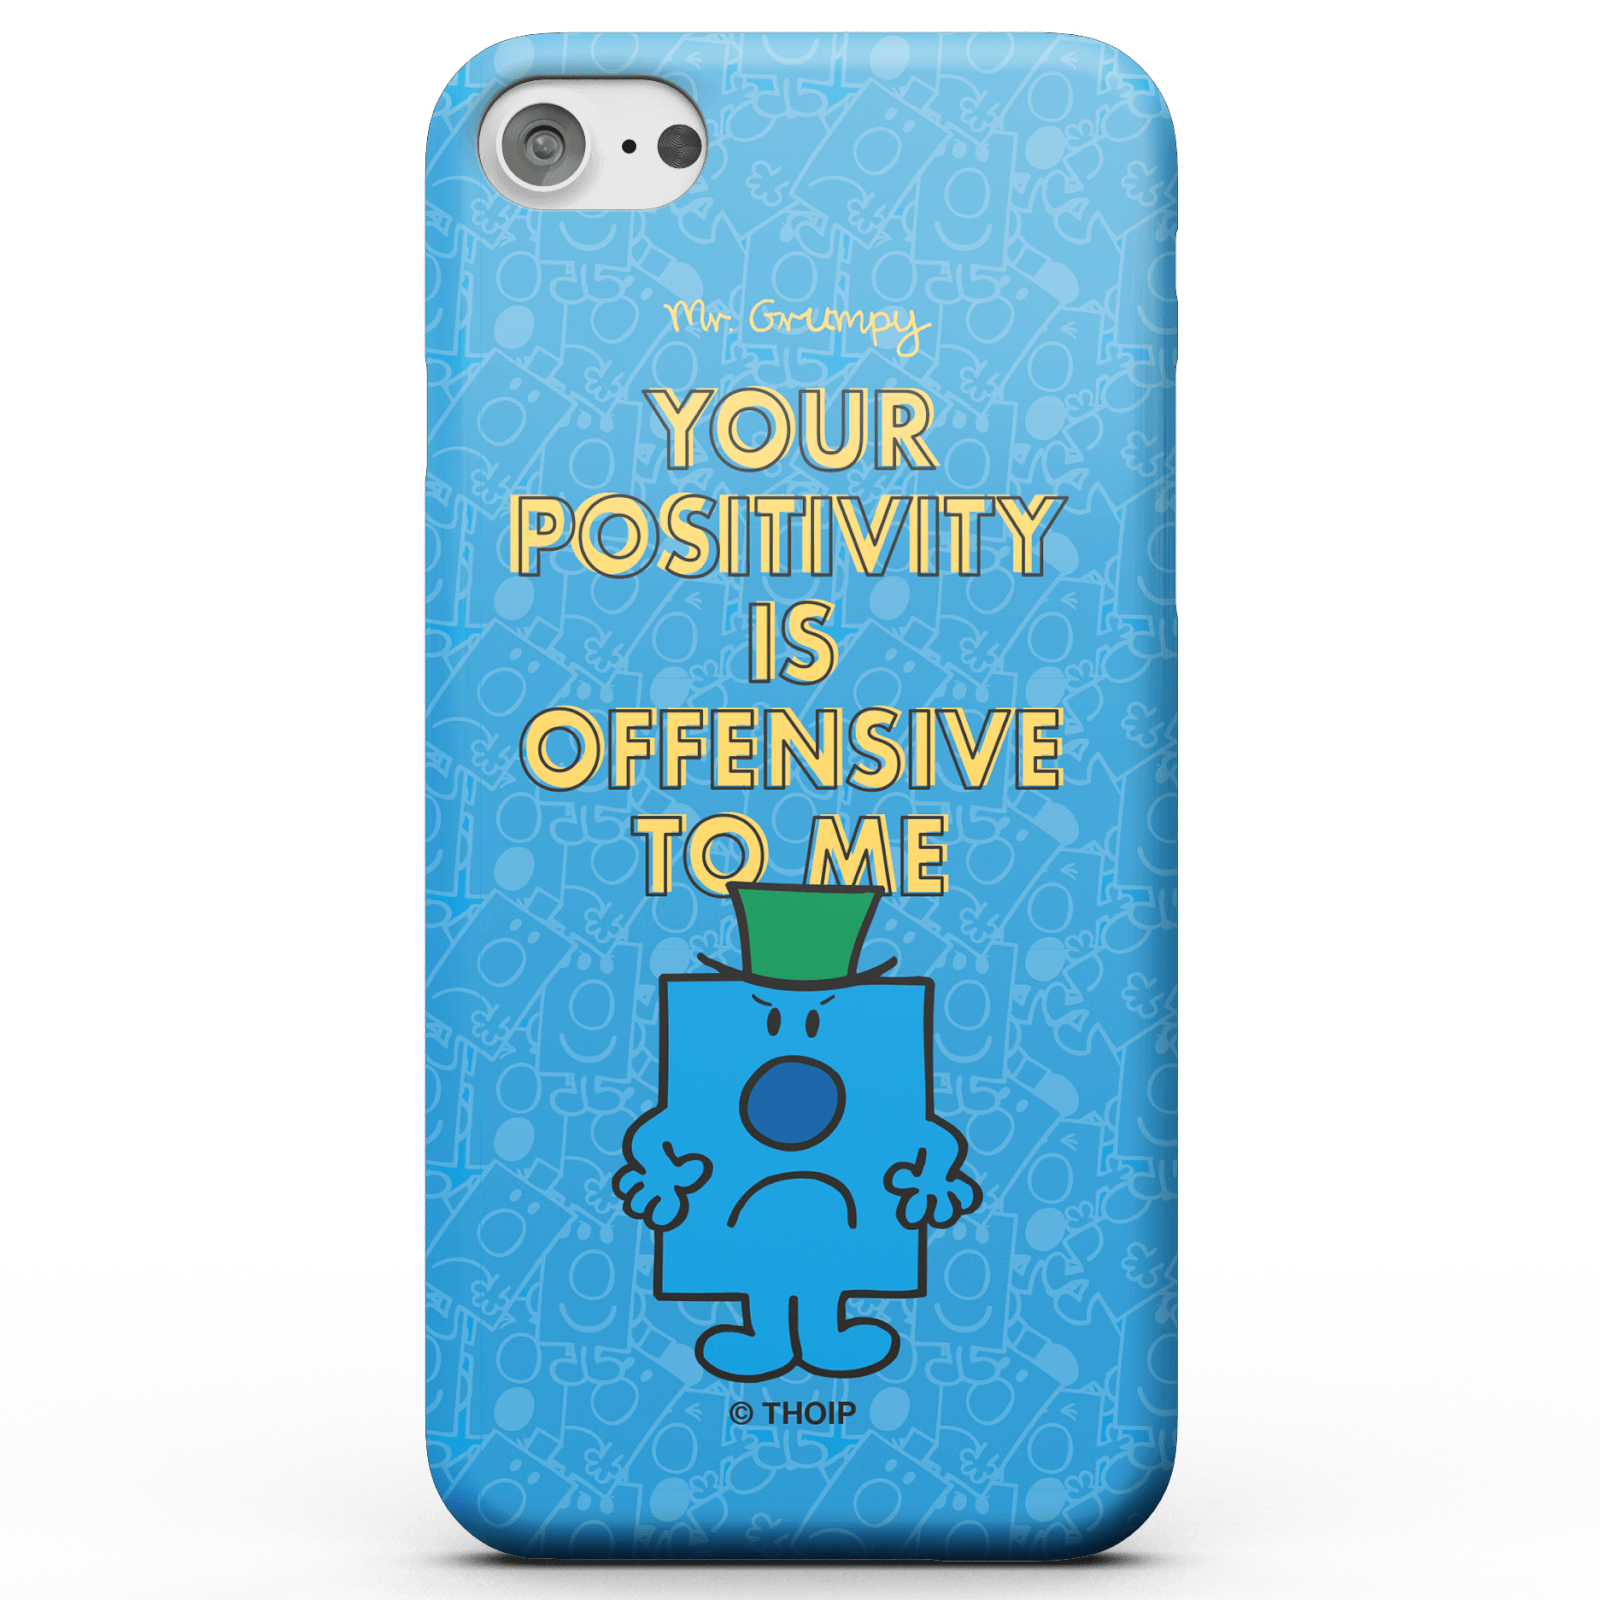 Mr Men & Little Miss Mr. Grumpy Your Positivity Is Offensive To Me Phone Case for iPhone and Android - iPhone 5/5s - Snap Case - Matte